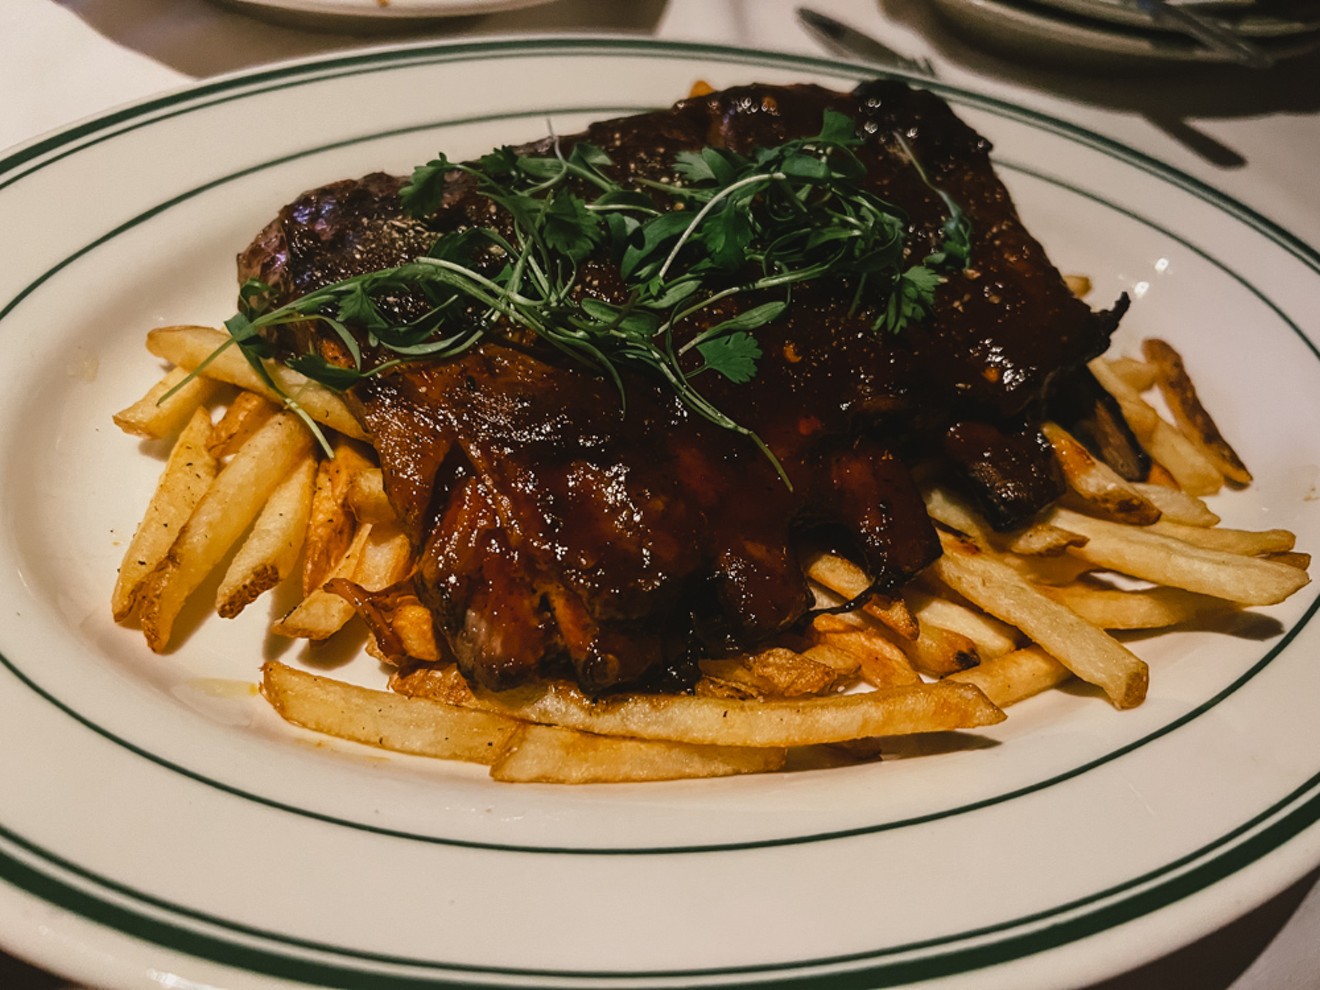 Sure, Las Palmas has Tex Mex skills, but these hickory ribs hit strong barbecue notes.